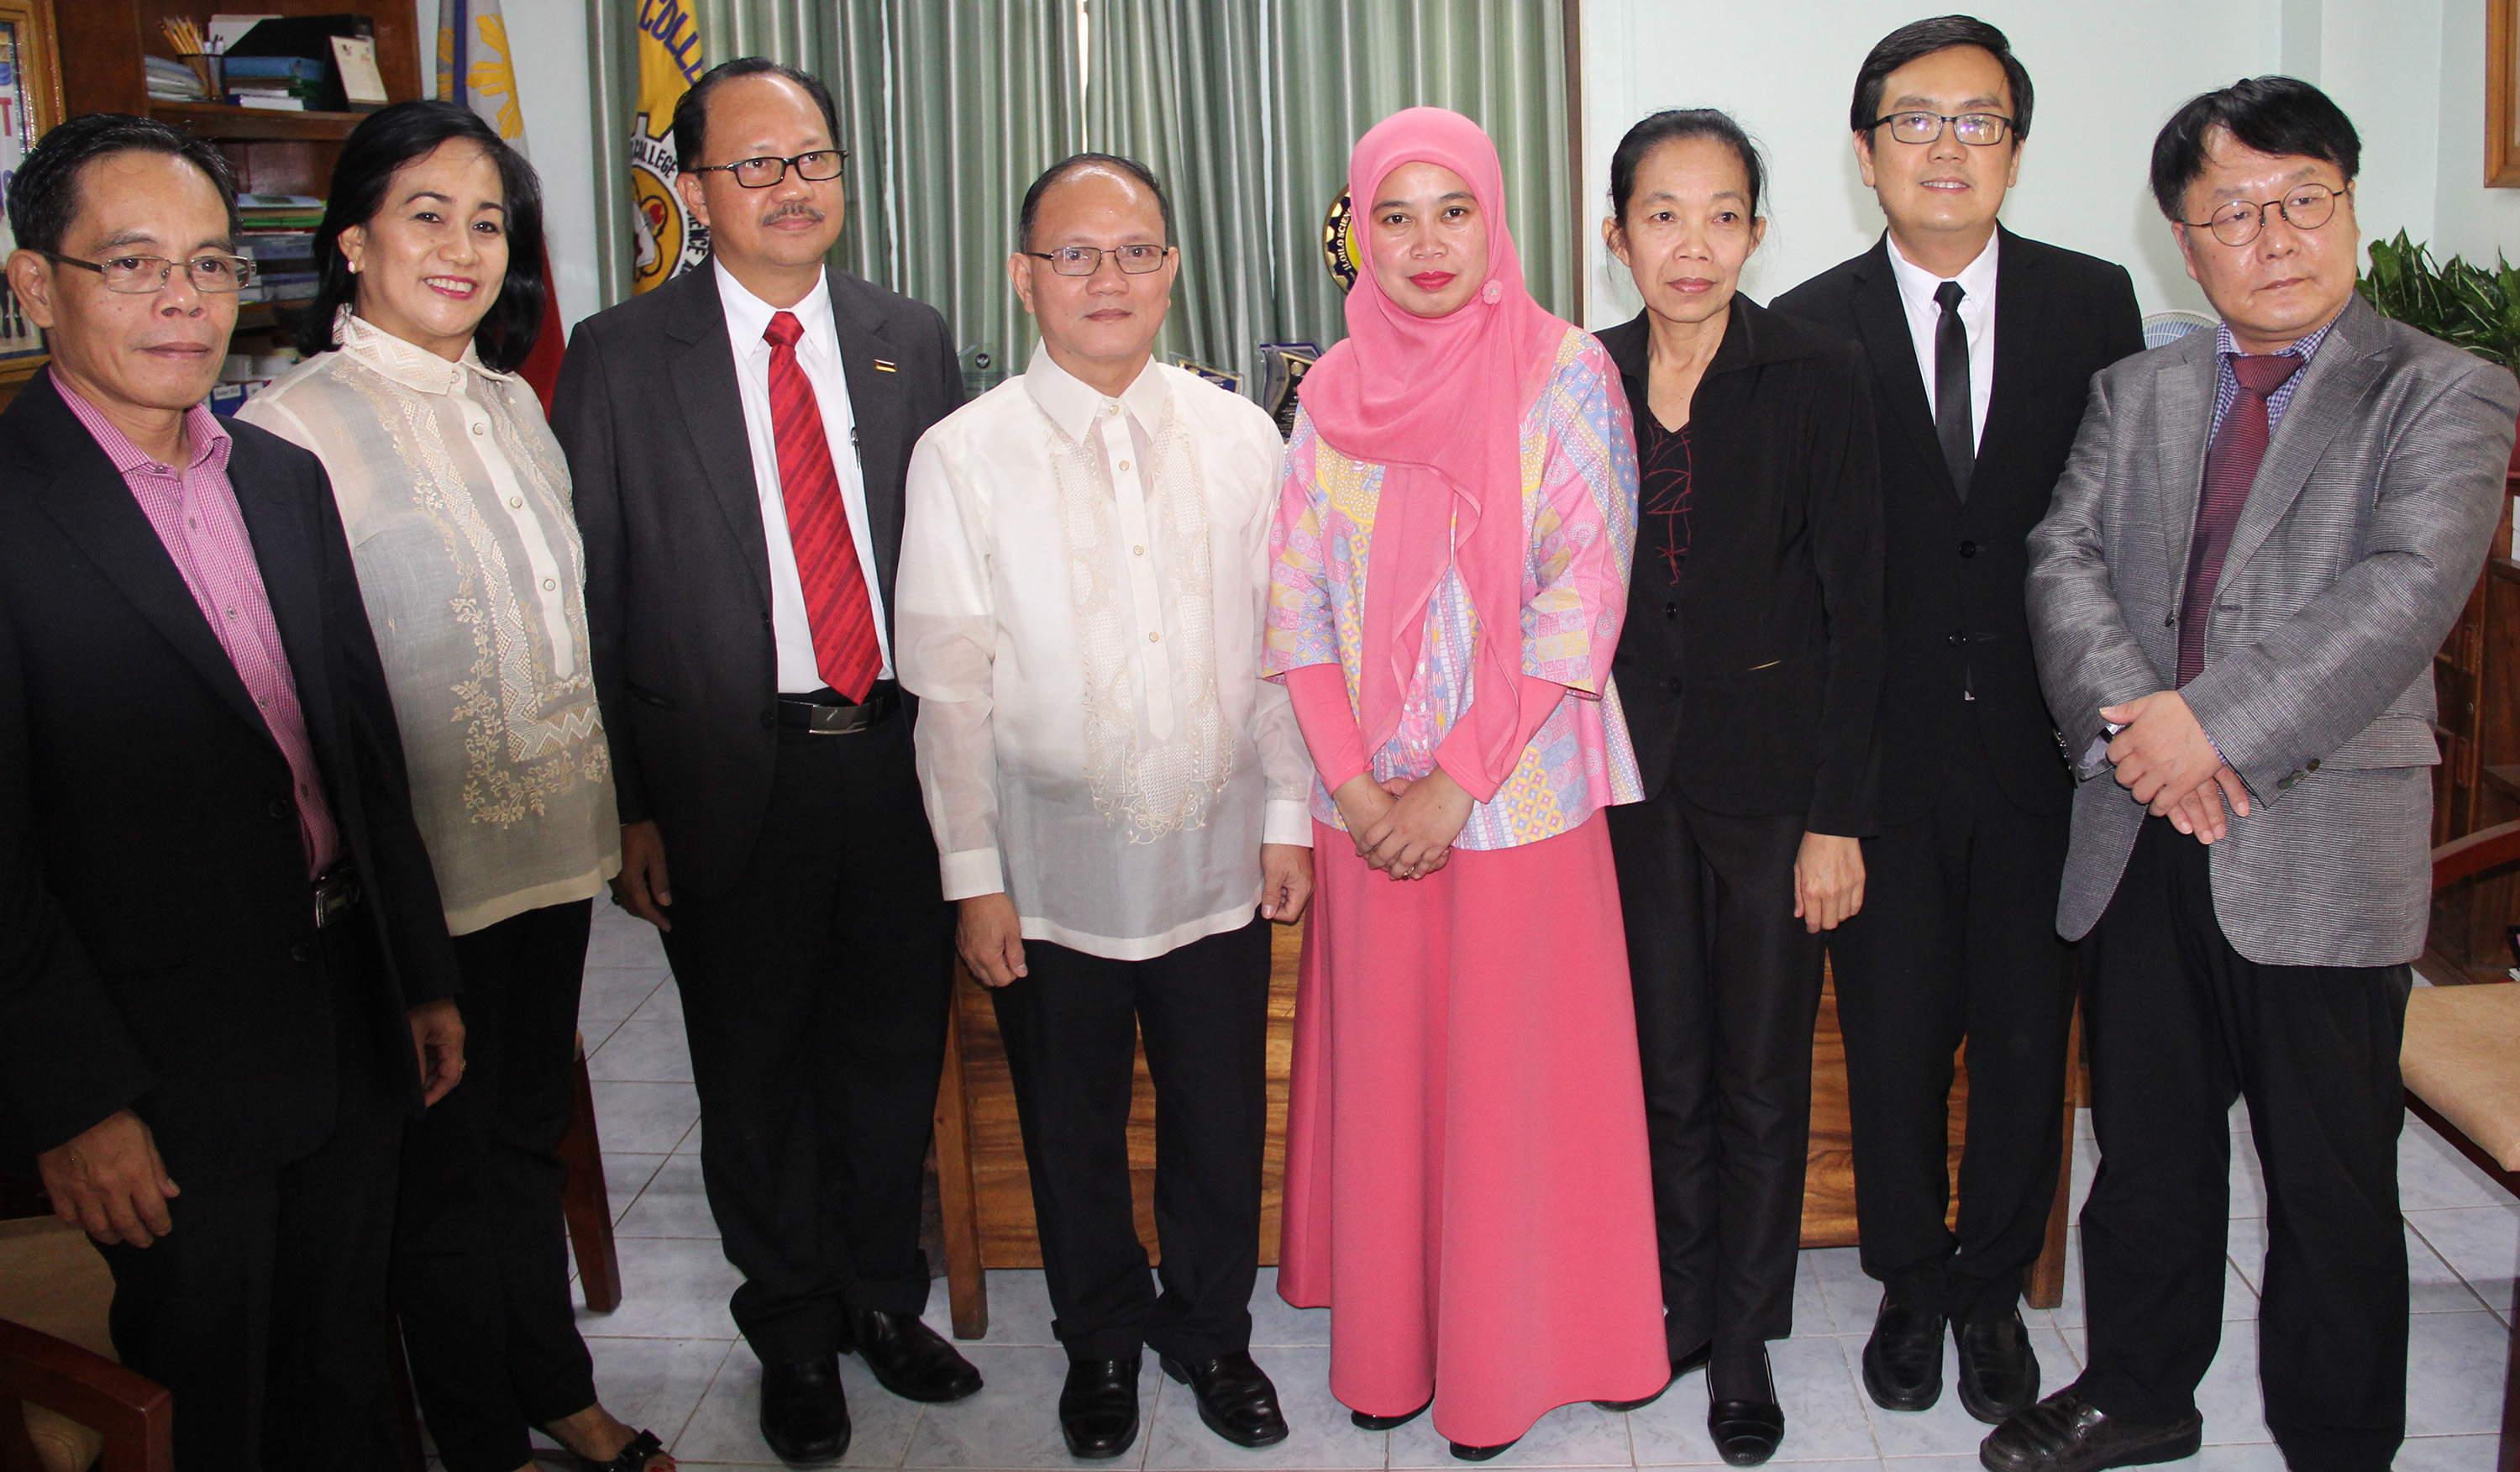 The delegates from the six-member nations of Asia-Pacific Network Sector of Technical Vocational Education and Training (TVET) during a courtesy visit at the Office of the University President. From left, Dr. Manuel de la rosa of UNEVOC Philippines manila Center. ISAT U VPAF Dr. Nehema K. Misola, Asso. Prof. Razzal Hassan of Malaysia, ISAT U Pres. Dr. Raul F. Muyong, Anita Widiawati of UNEVOC Indonesia, Deputy Director Nivone Moungkhounsavath of Laos, Mr. Panyachart Wongpanya , OVEC Thailand and Dr. Hwang Gyu-Hee of the Korean Research Institute for Vocational Education and Training (KTIVET) Center for Global Cooperation.